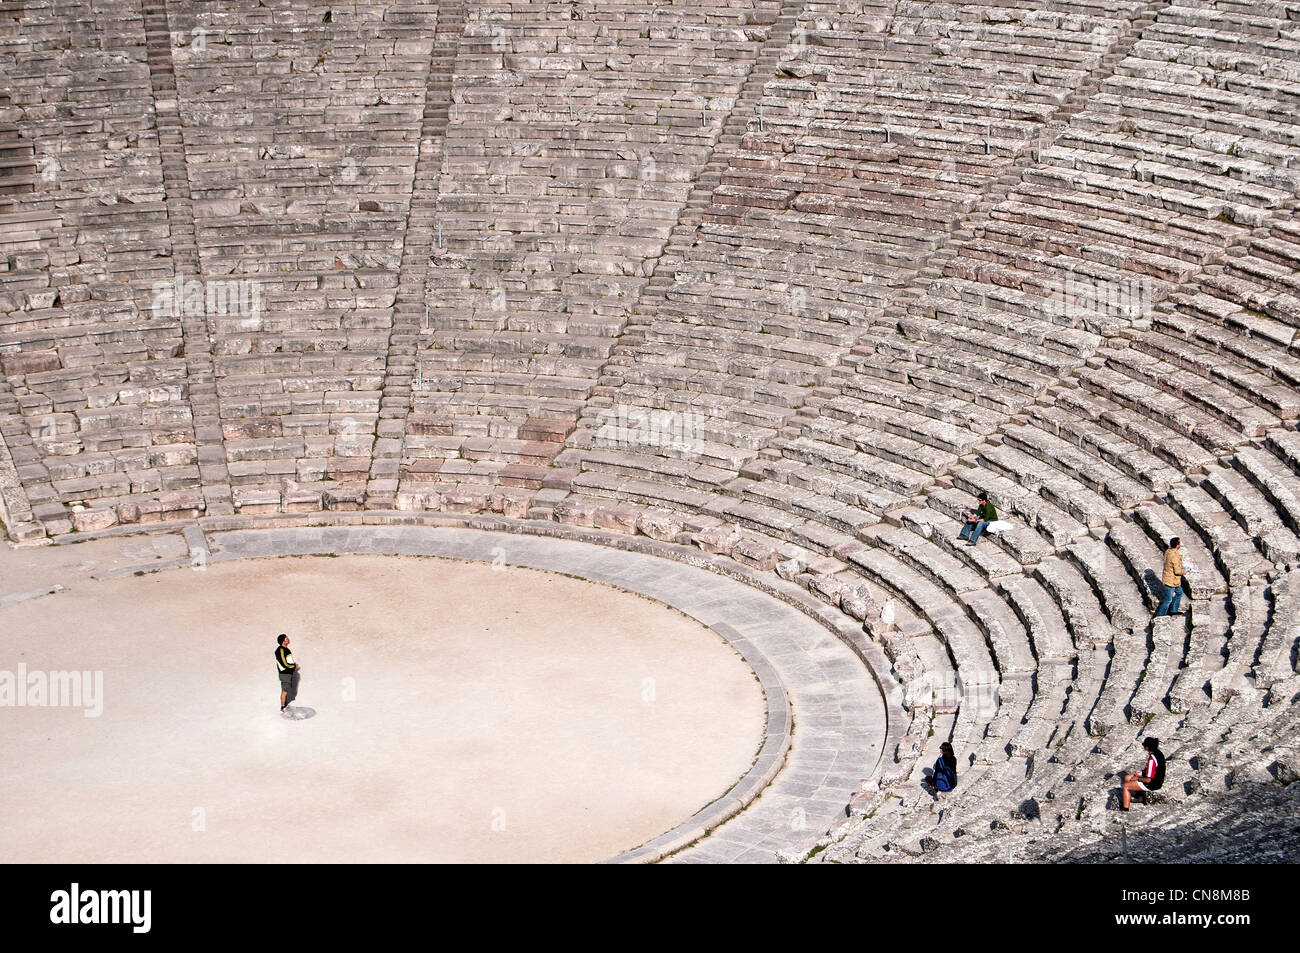 Epidaurus , the famous ancient classical greek theater with exceptional acoustics, built 4-th century BC- Peloponnese, Greece Stock Photo